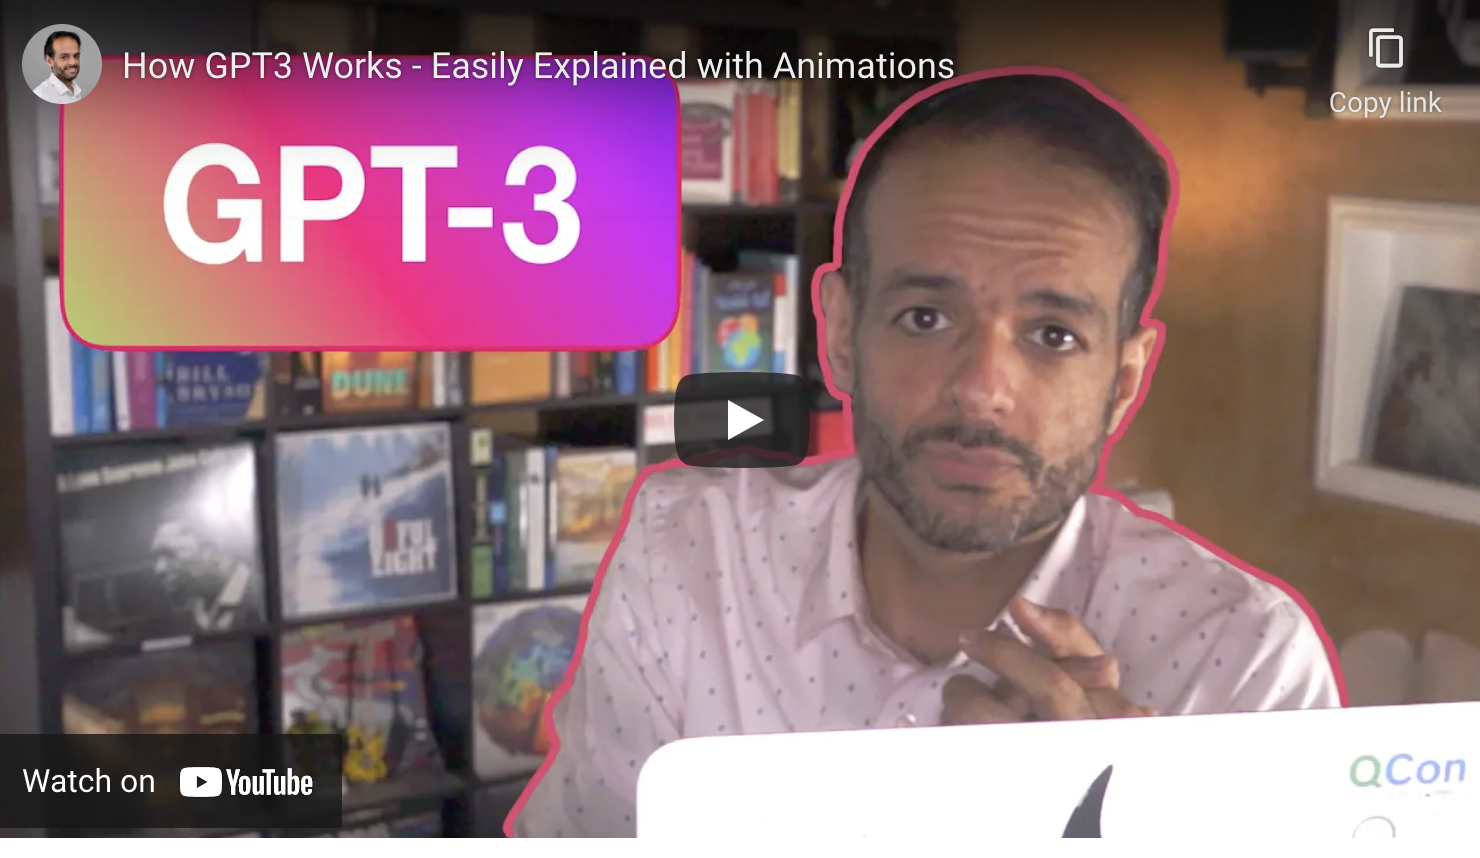 How_GPT3_Works_-_Easily_Explained_with_Animations.png